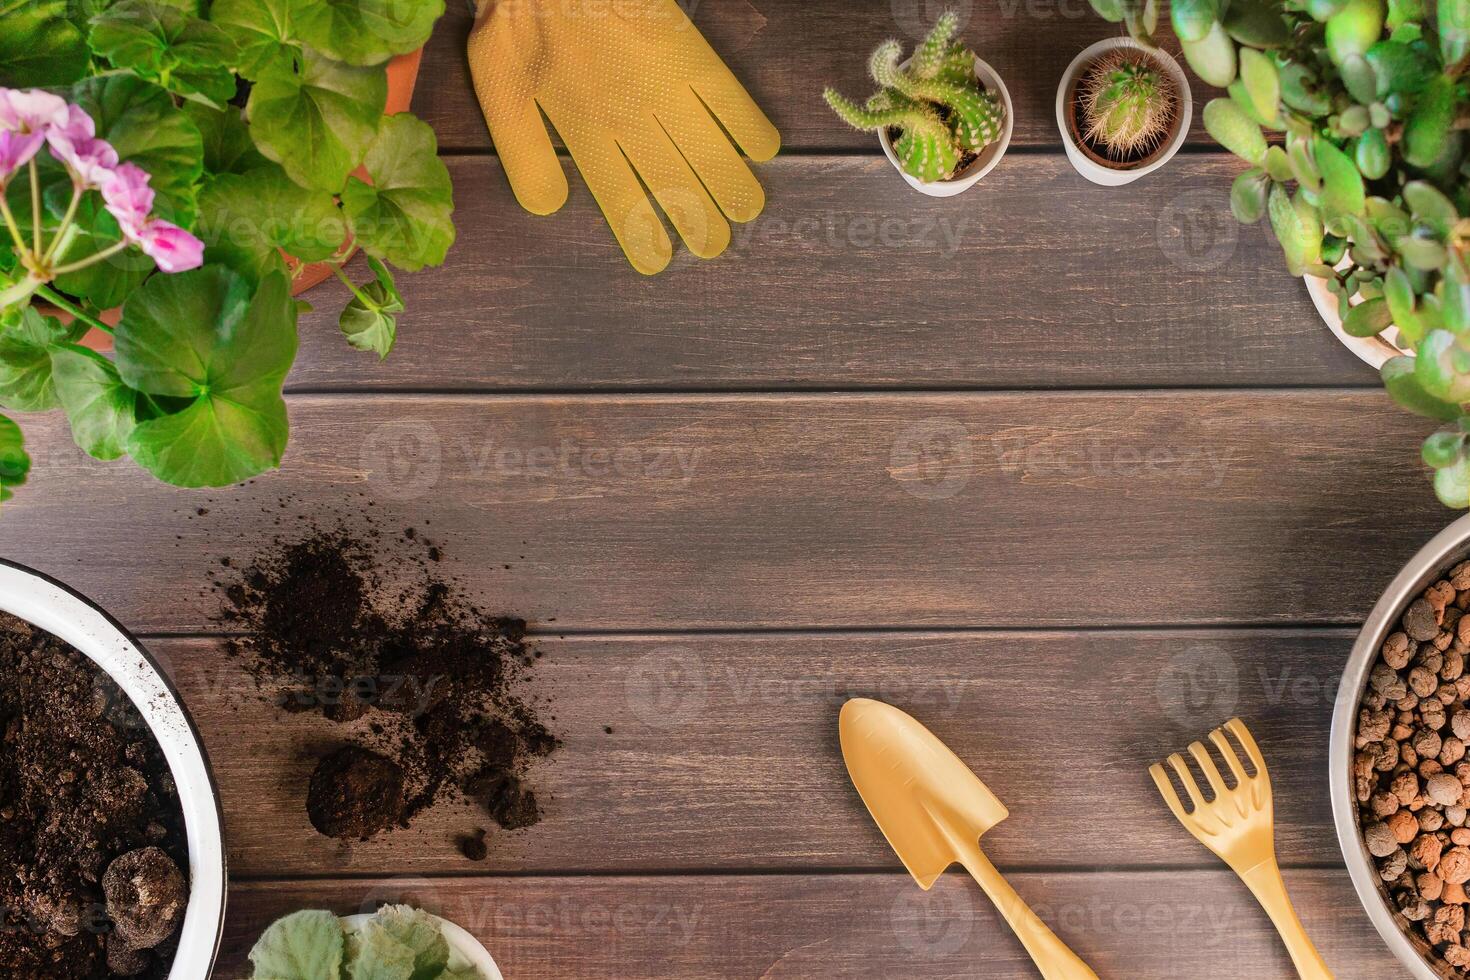 Gardener concept, wooden table background, take care in home garden. Flat lay, copy space for your text. Hobby of plant, gardening or houseplant indoor. Cactus in ceramic pot, soil, gloves, rake, photo